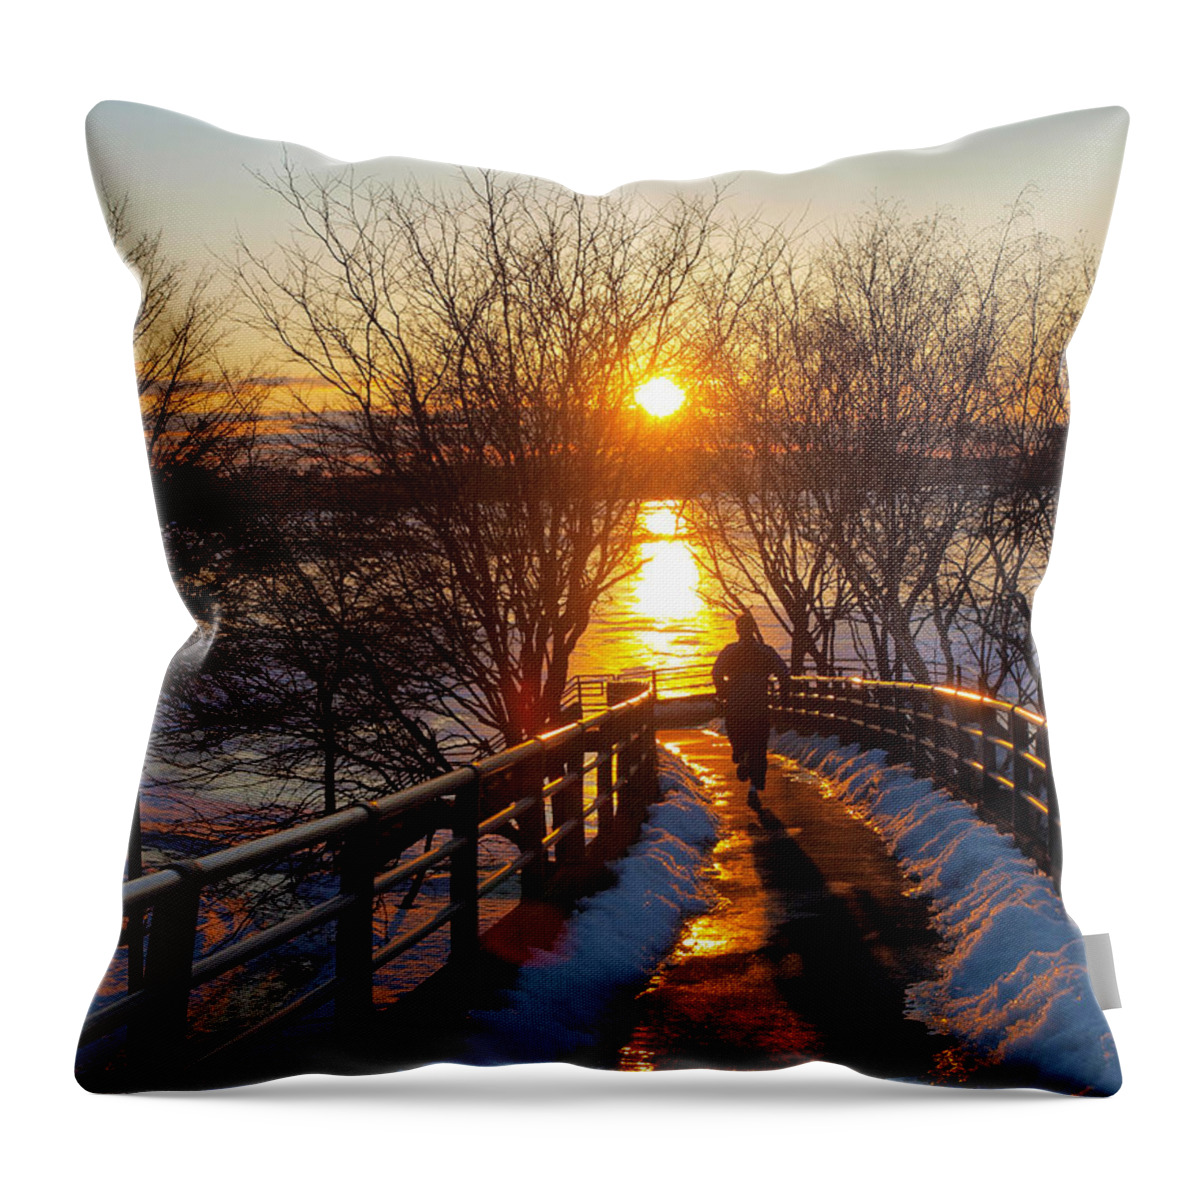 Blue Boston Bridge Ice Jog Jogging Life Magnificent Melting Nature Never Passion River Running Shadow Shinning Sky Snow Splendid Sport Sports Stop Sun Sunset Wet Winter Throw Pillow featuring the photograph Running in Sunset by Paul Ge